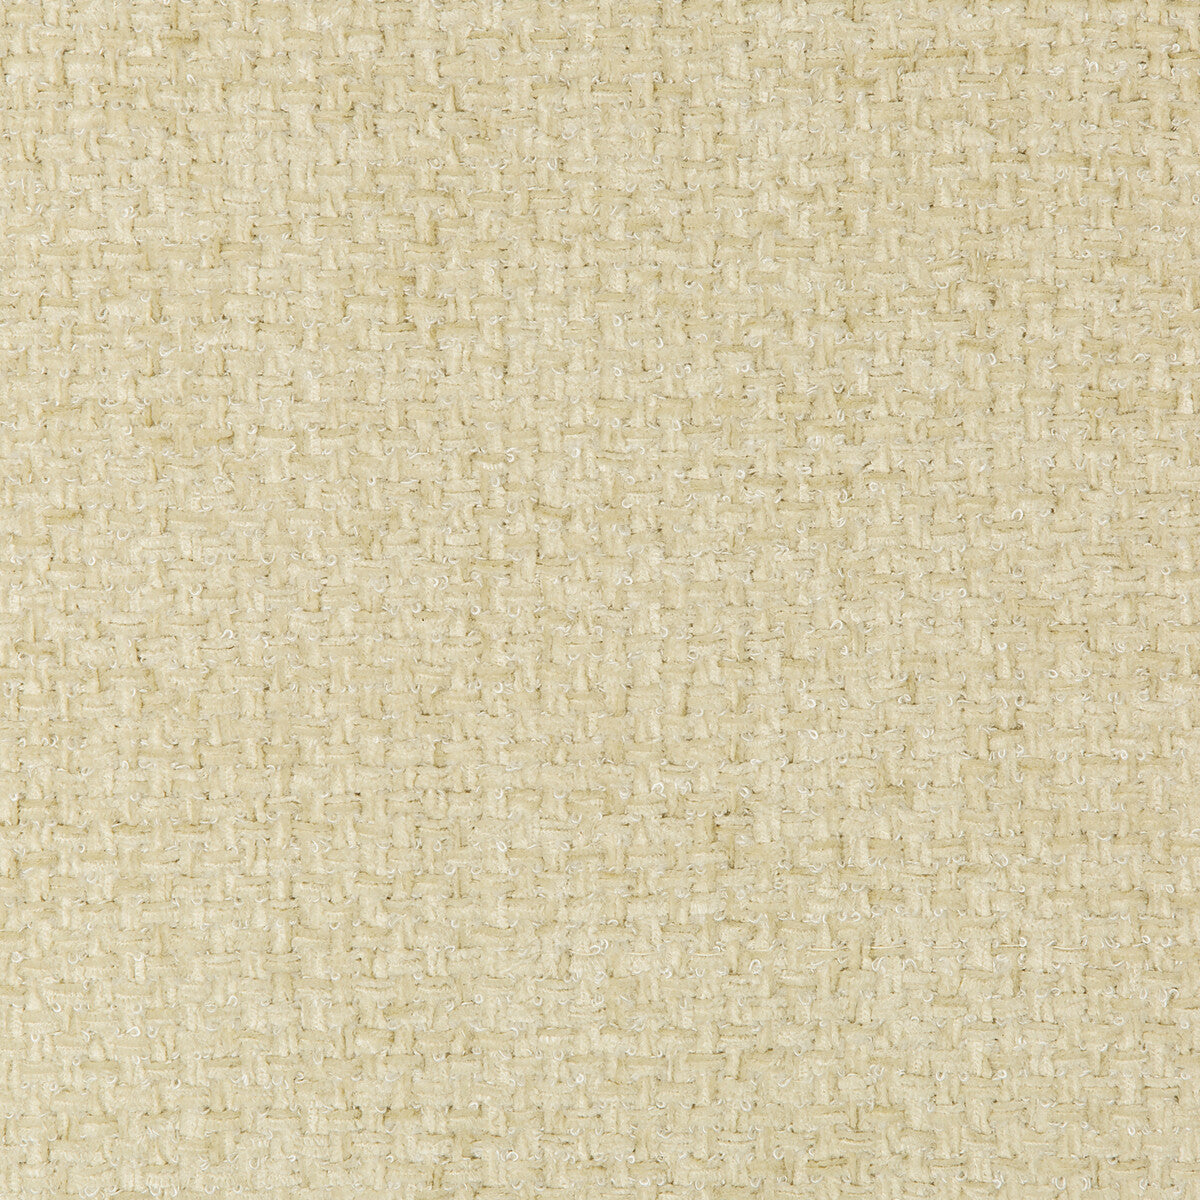 Arly Texture fabric in pearl color - pattern 8019143.1.0 - by Brunschwig &amp; Fils in the Chambery Textures II collection